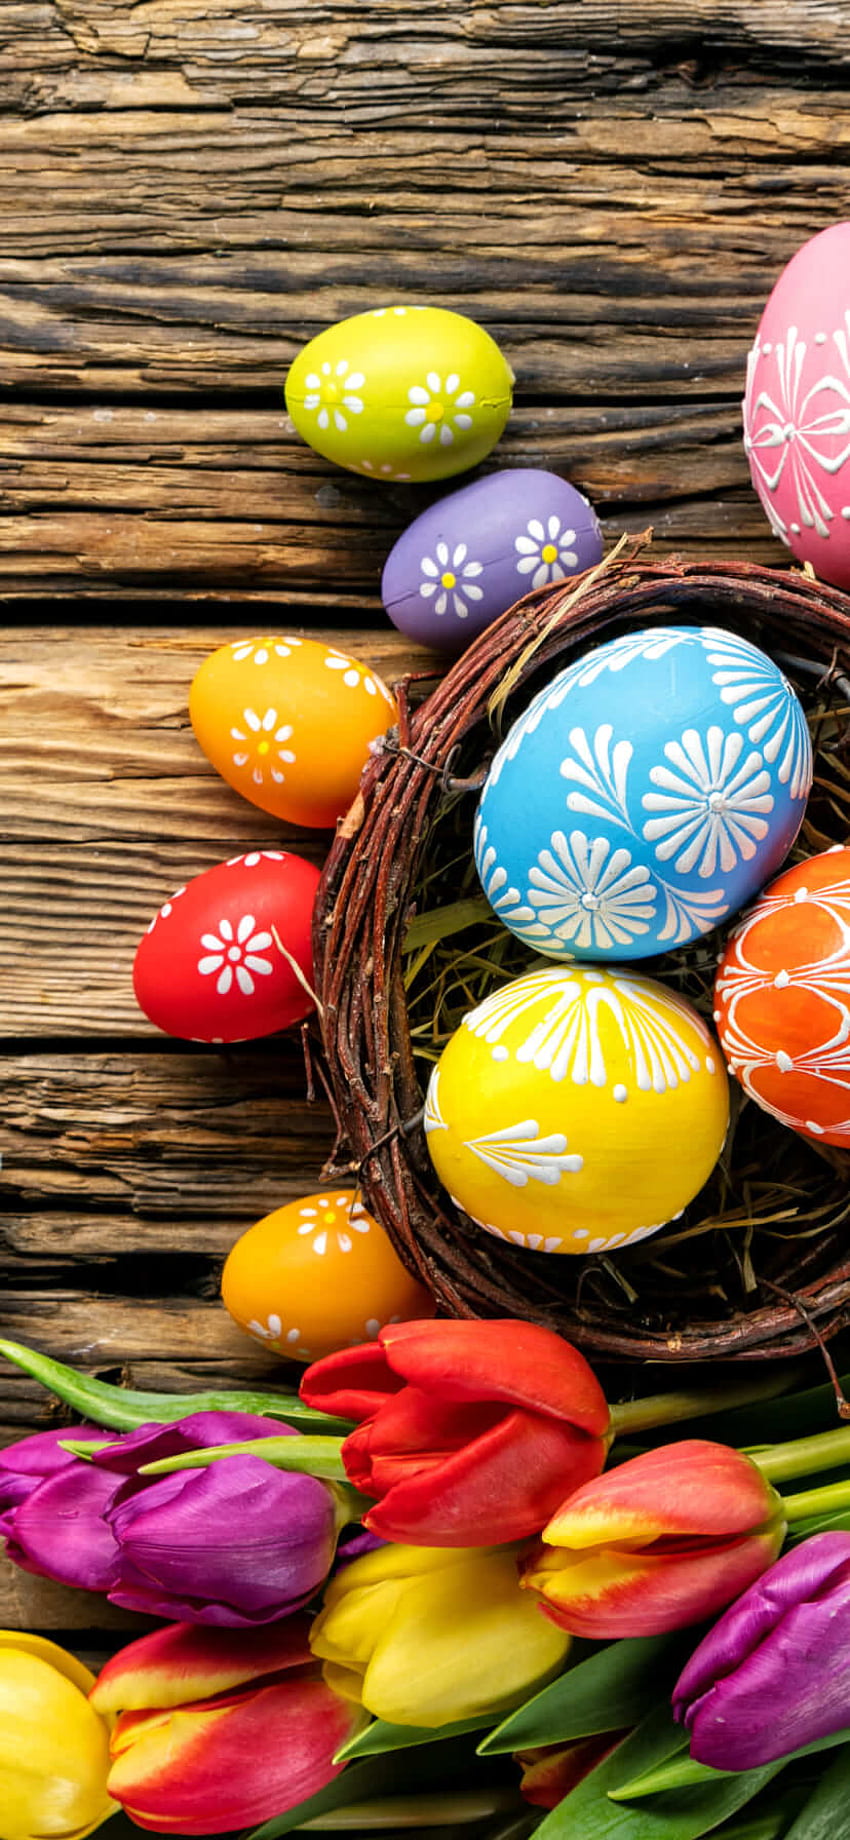 Download Celebrate Easter In Style with an Iphone Wallpaper  Wallpaperscom